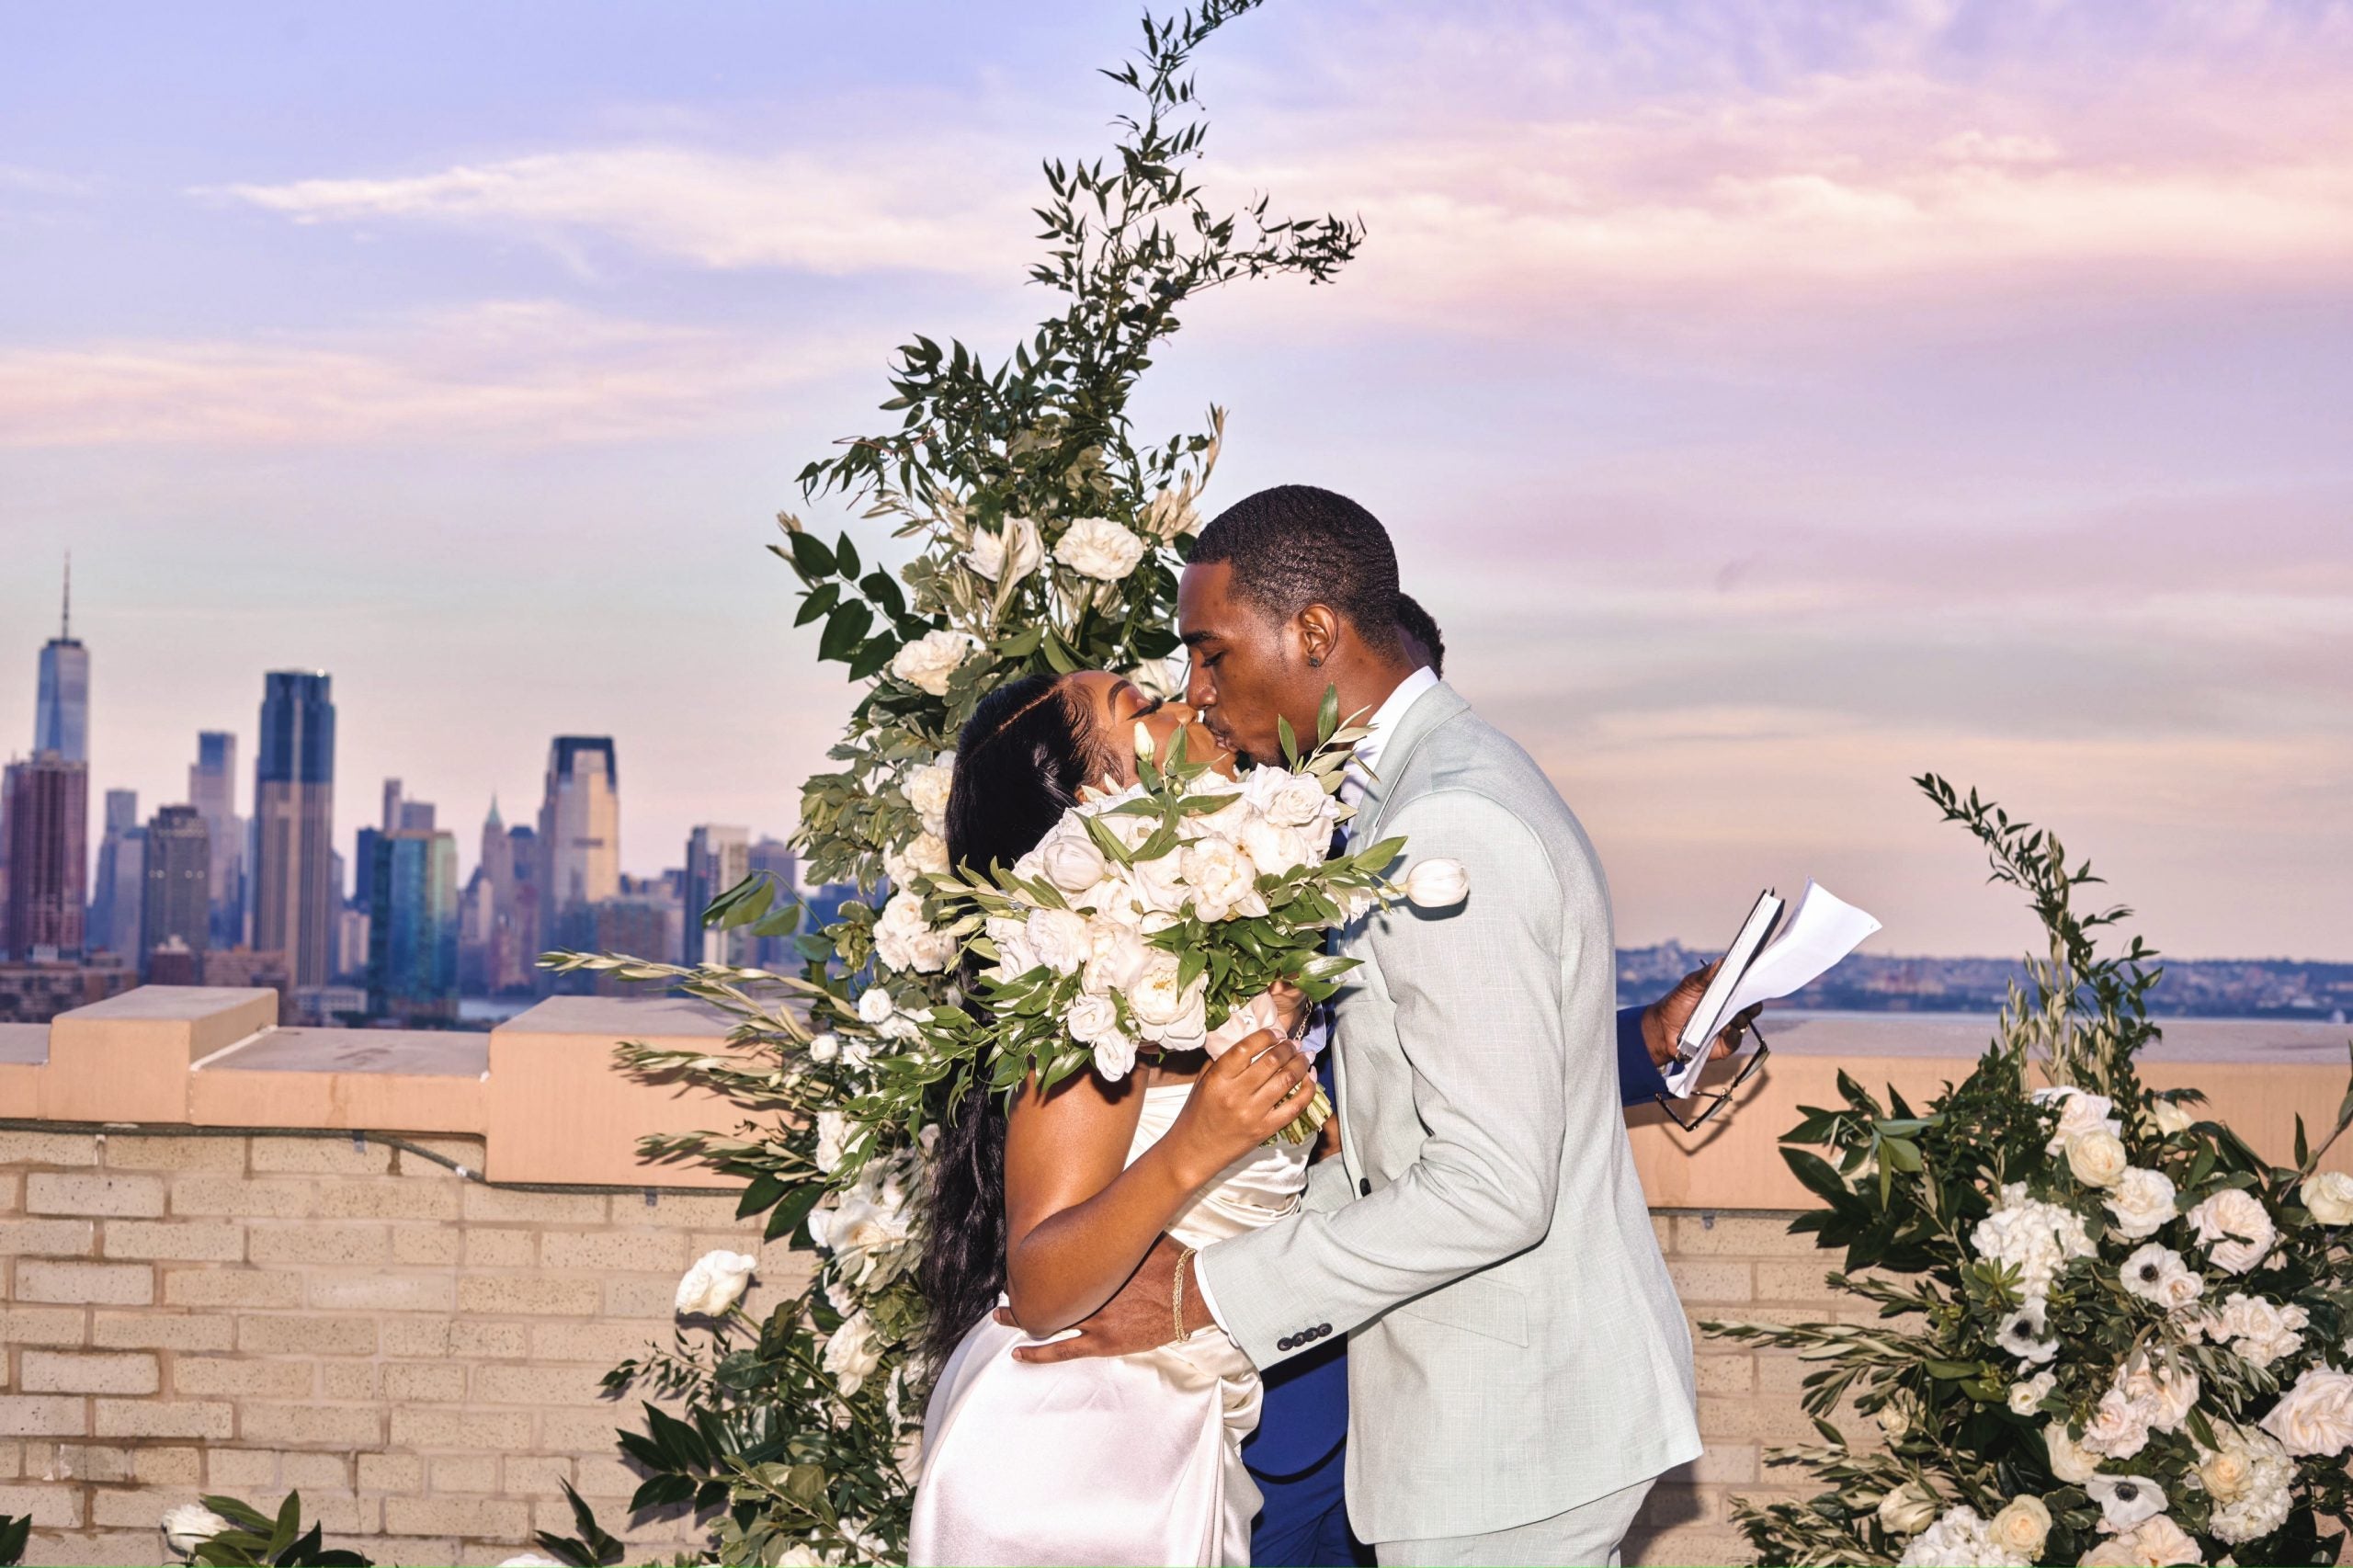 Bridal Bliss: Essie And Maurice's Micro Wedding Gave Us 'Black Love In The City'